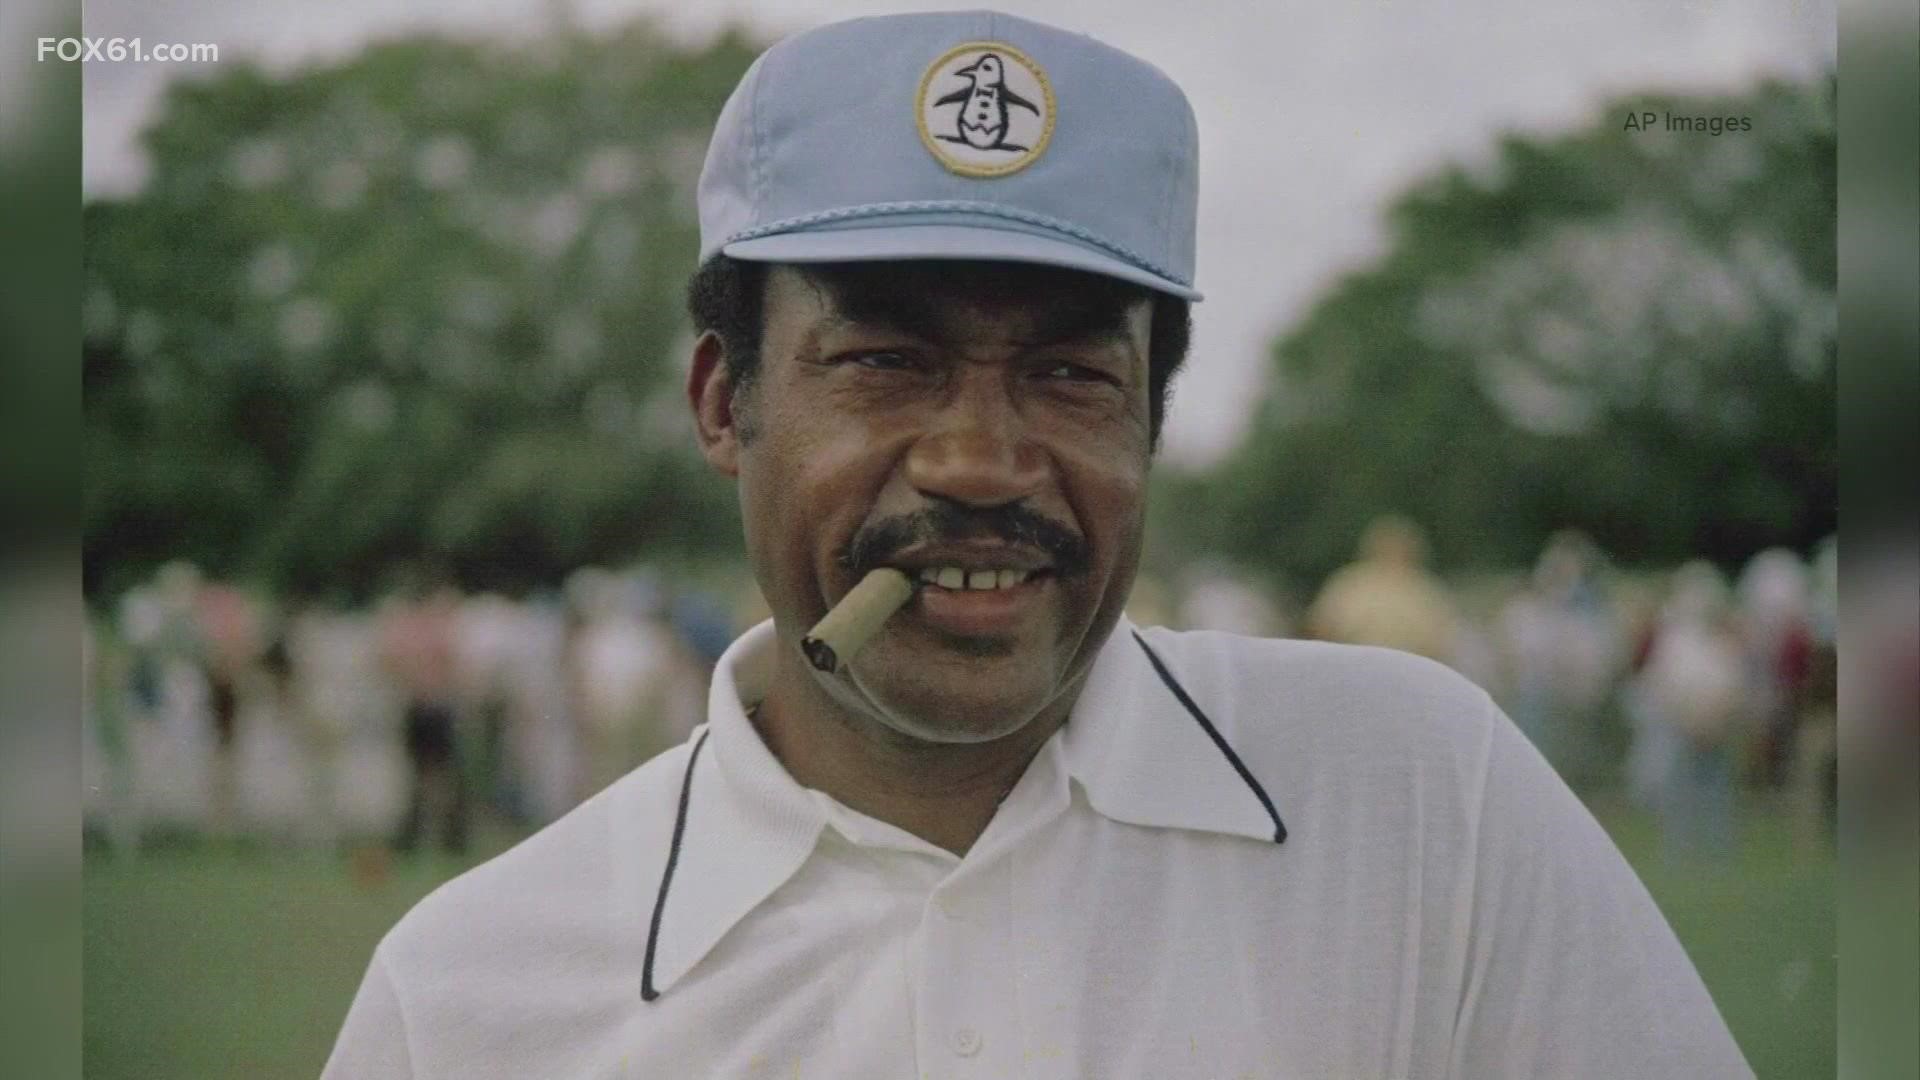 Sifford was the first African-American to become a member of the PGA and the first African-American to be inducted into the PGA Hall of Fame.